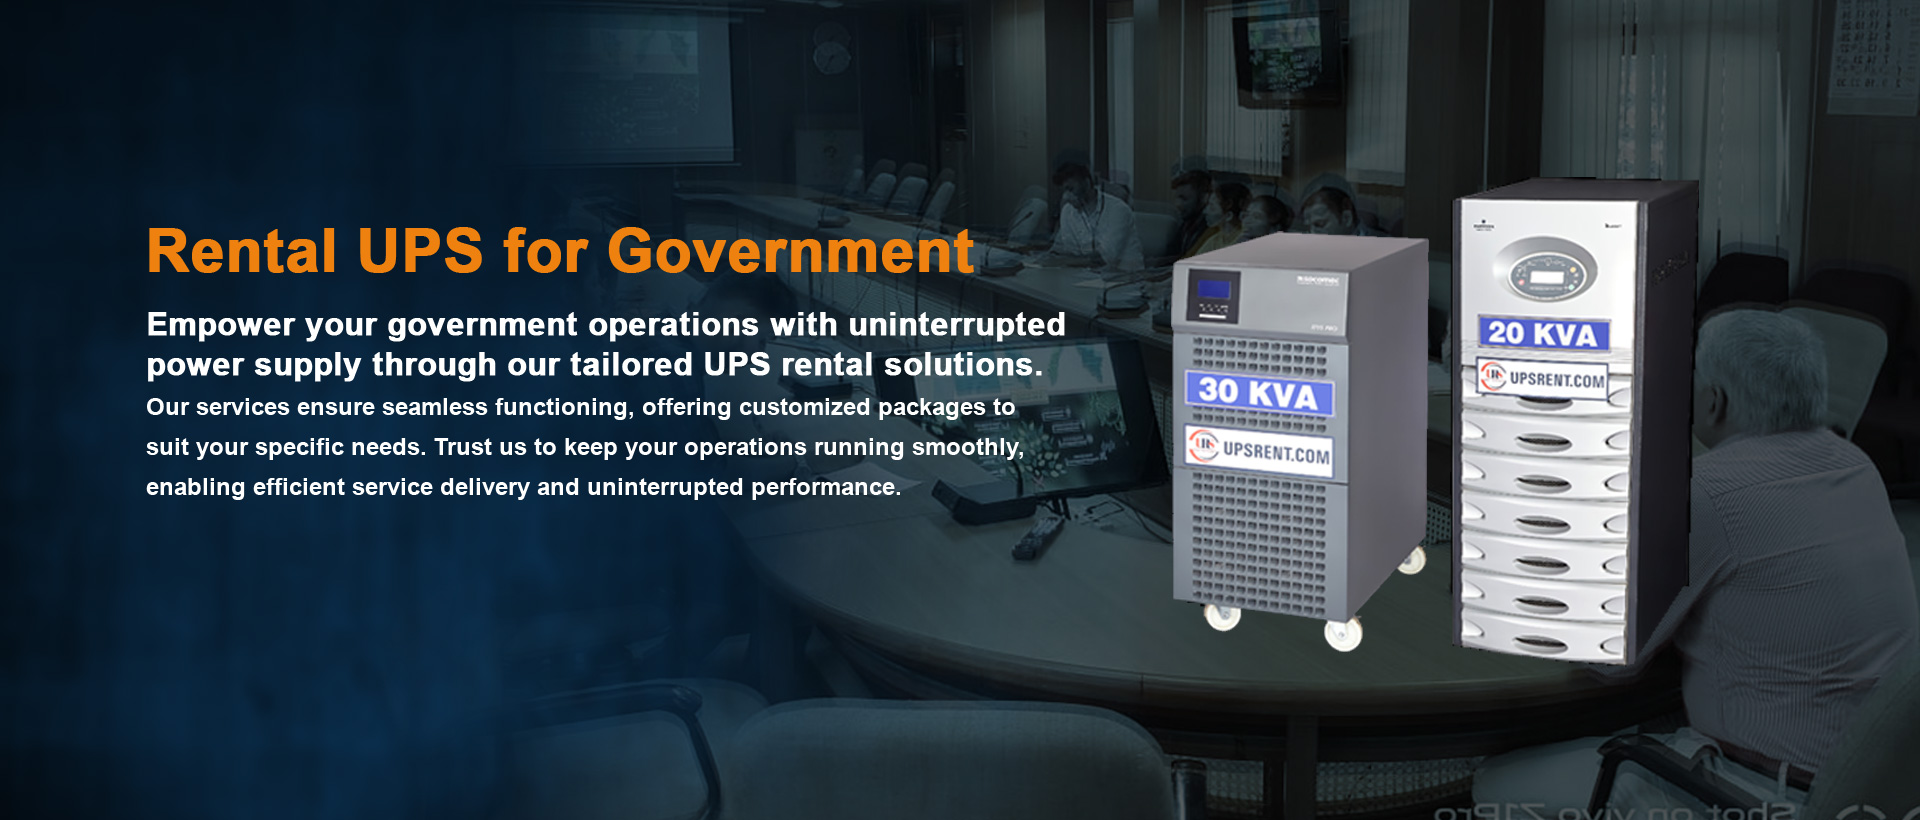 Rental UPS for Government